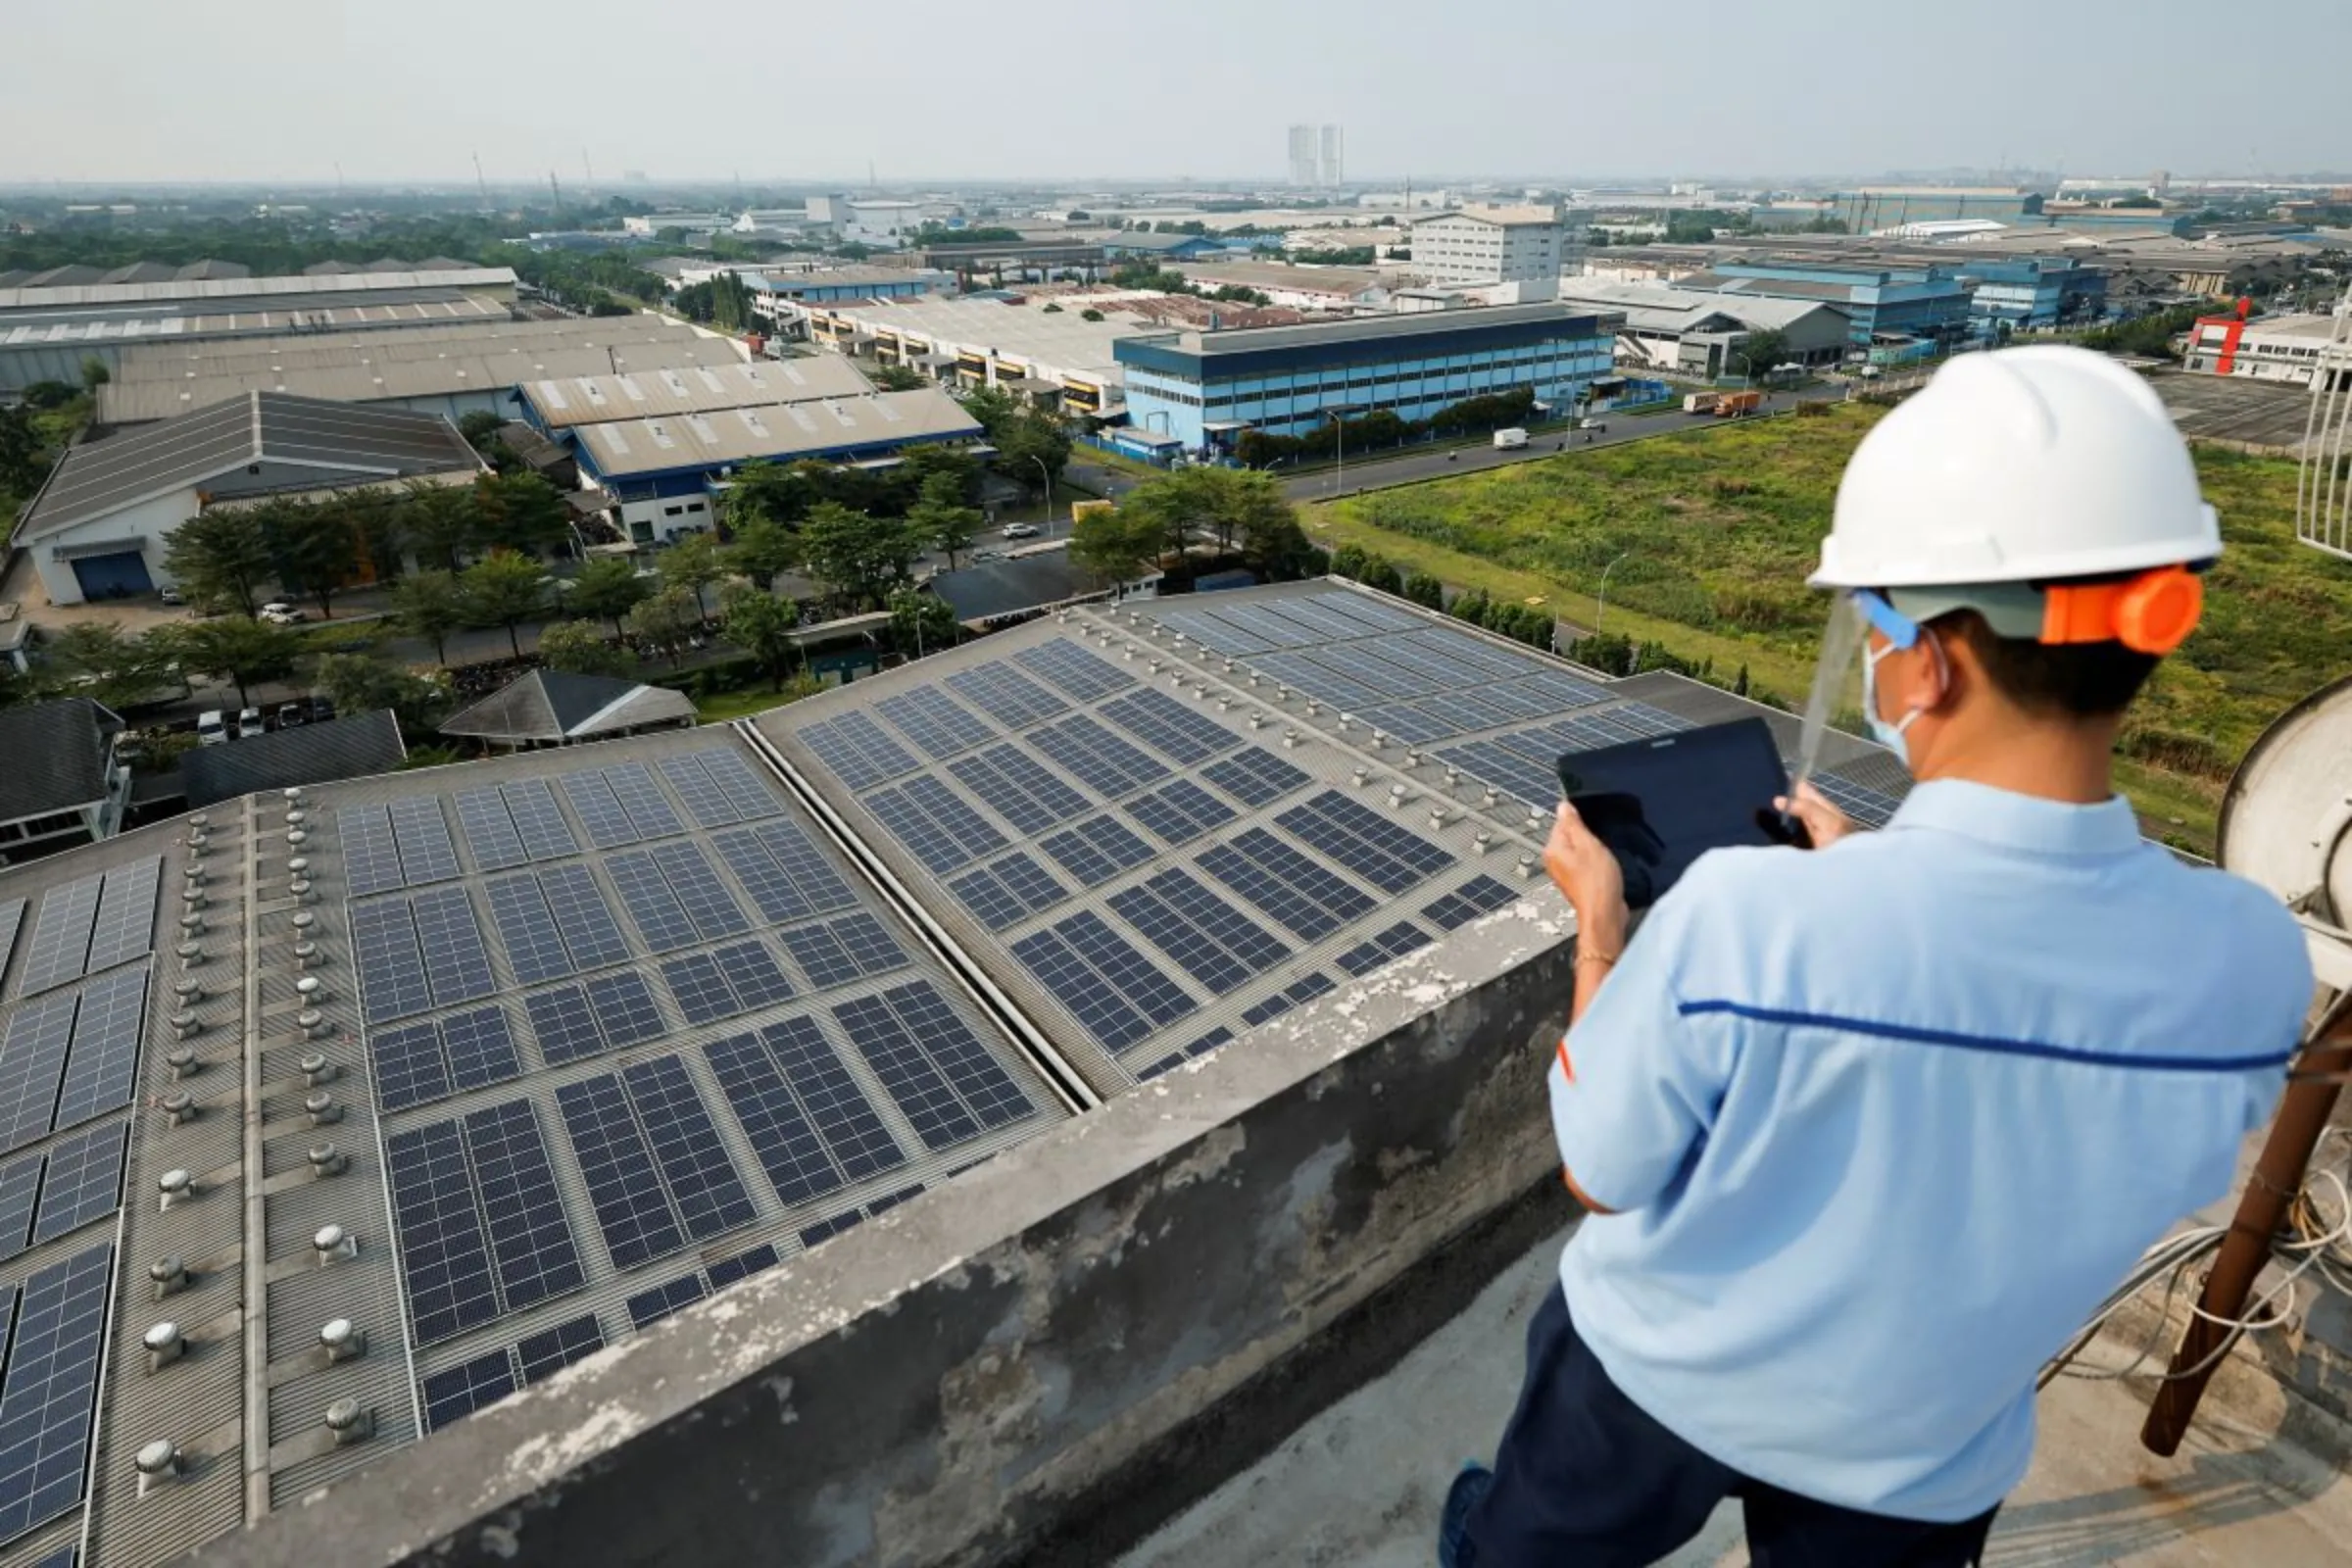 An engineer checks the electrical power from the solar panels that are installed on the roof of Bogasari Flour Mills factory in Bekasi, West Java province, Indonesia, September 15, 2022